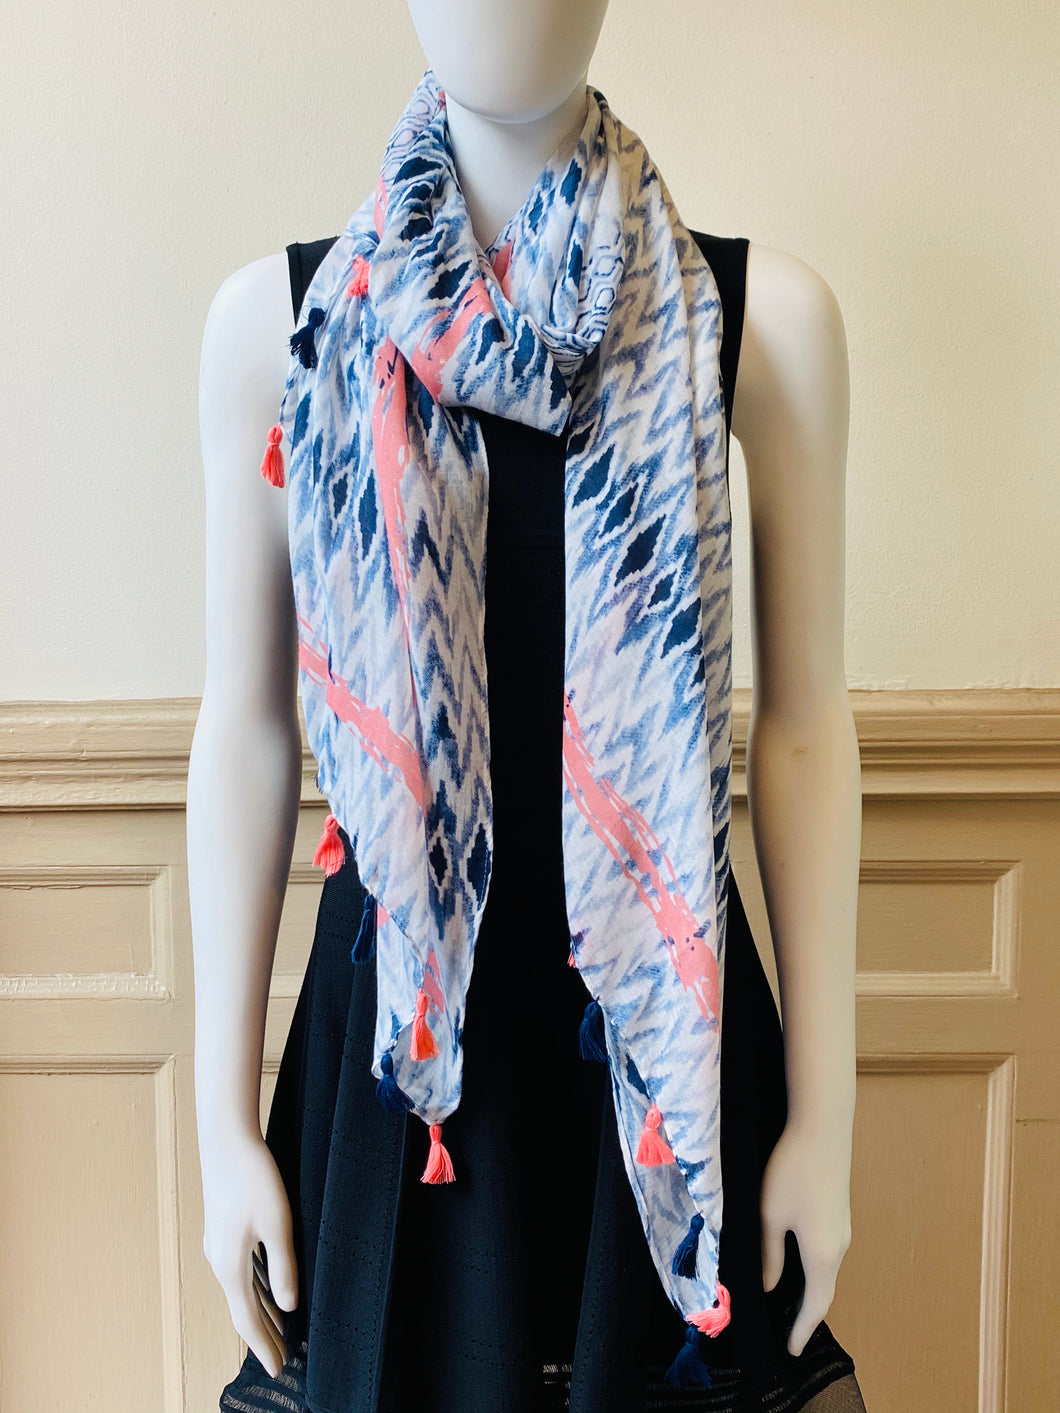 Peach and Blue Patterned Scarf